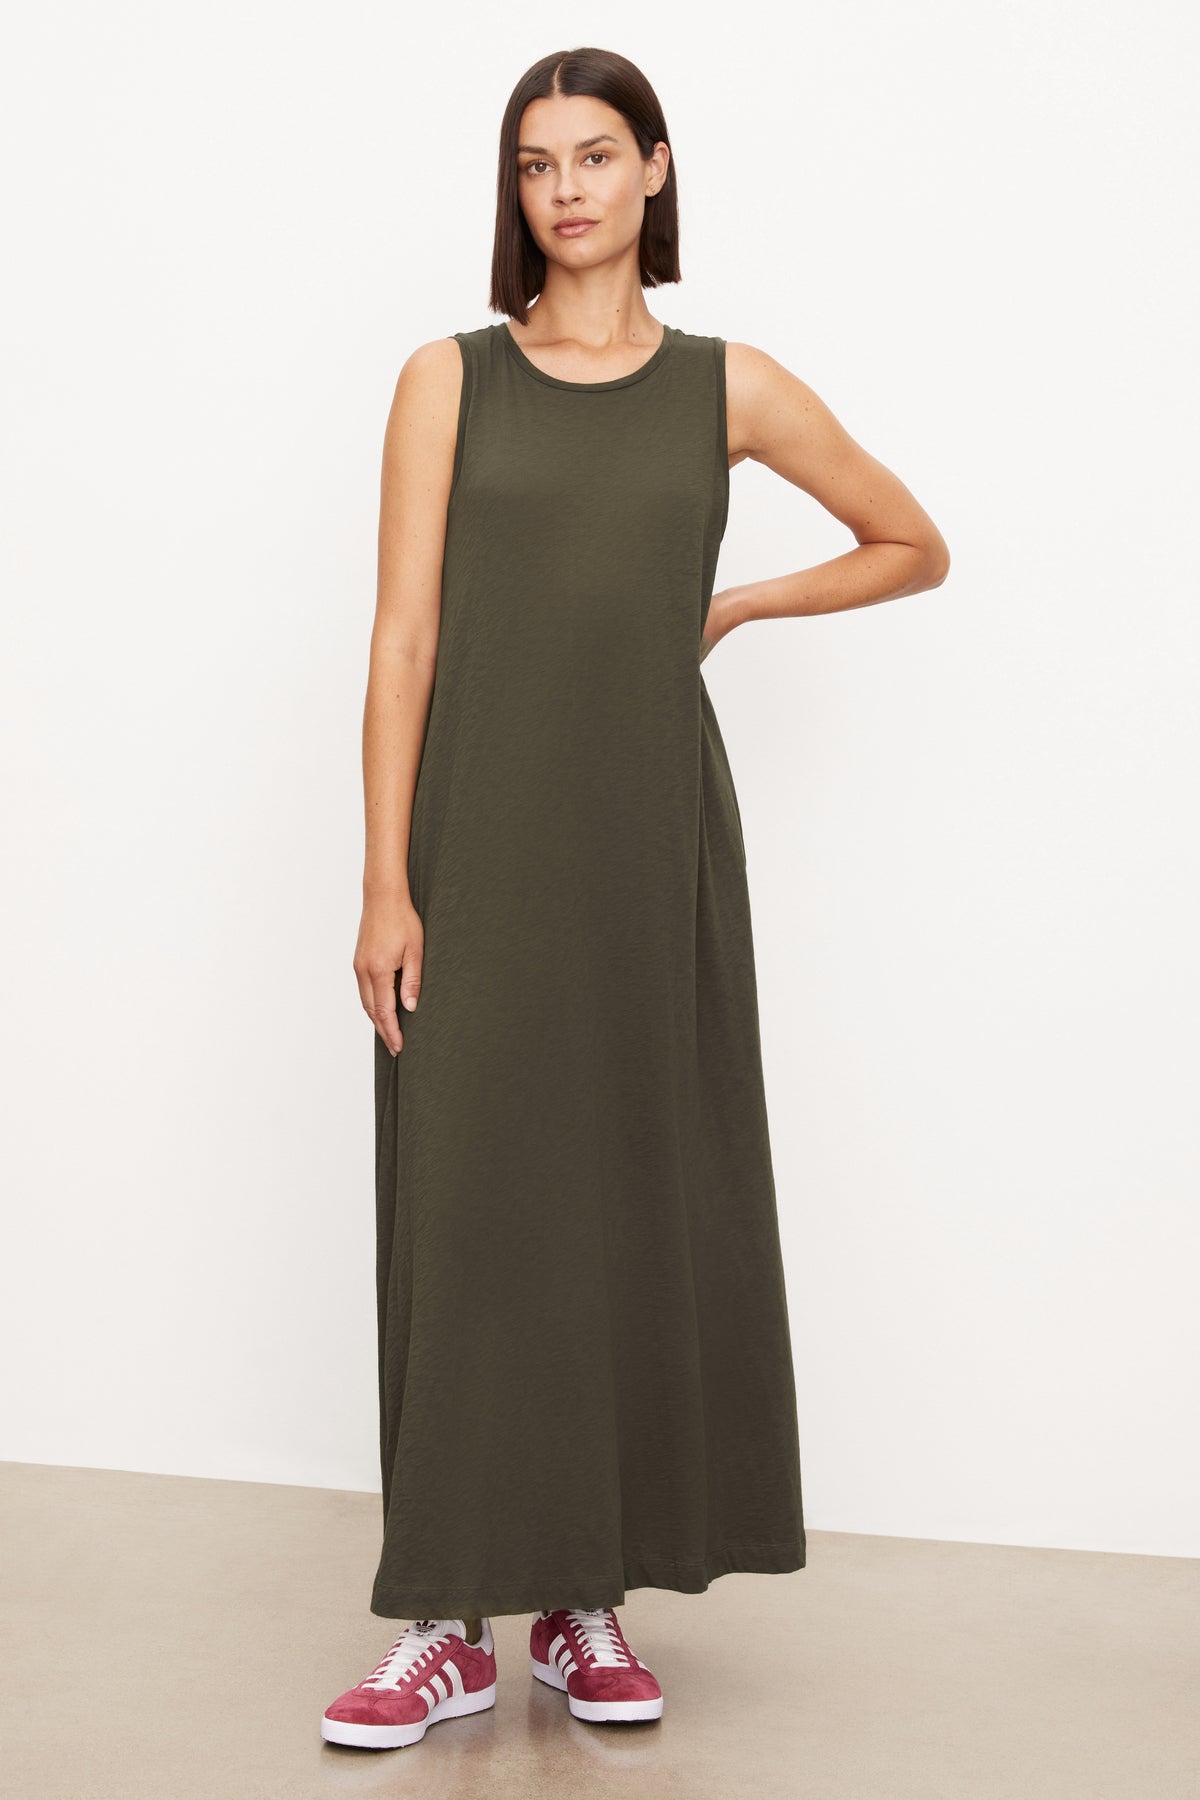   A woman wearing an olive green EDITH SLEEVELESS MAXI DRESS by Velvet by Graham & Spencer with a long silhouette and slash pockets. 